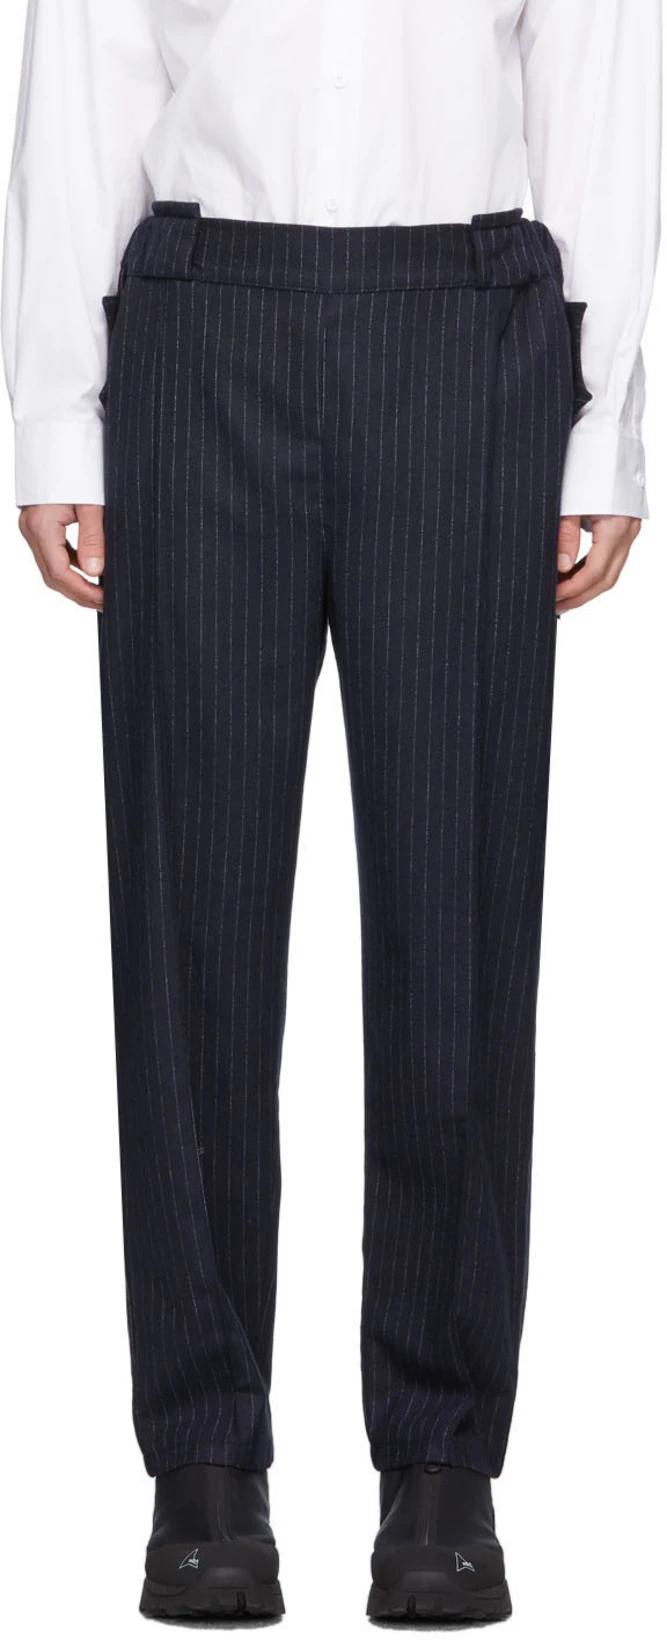 Navy Pinstripe Trousers by BORAMY VIGUIER